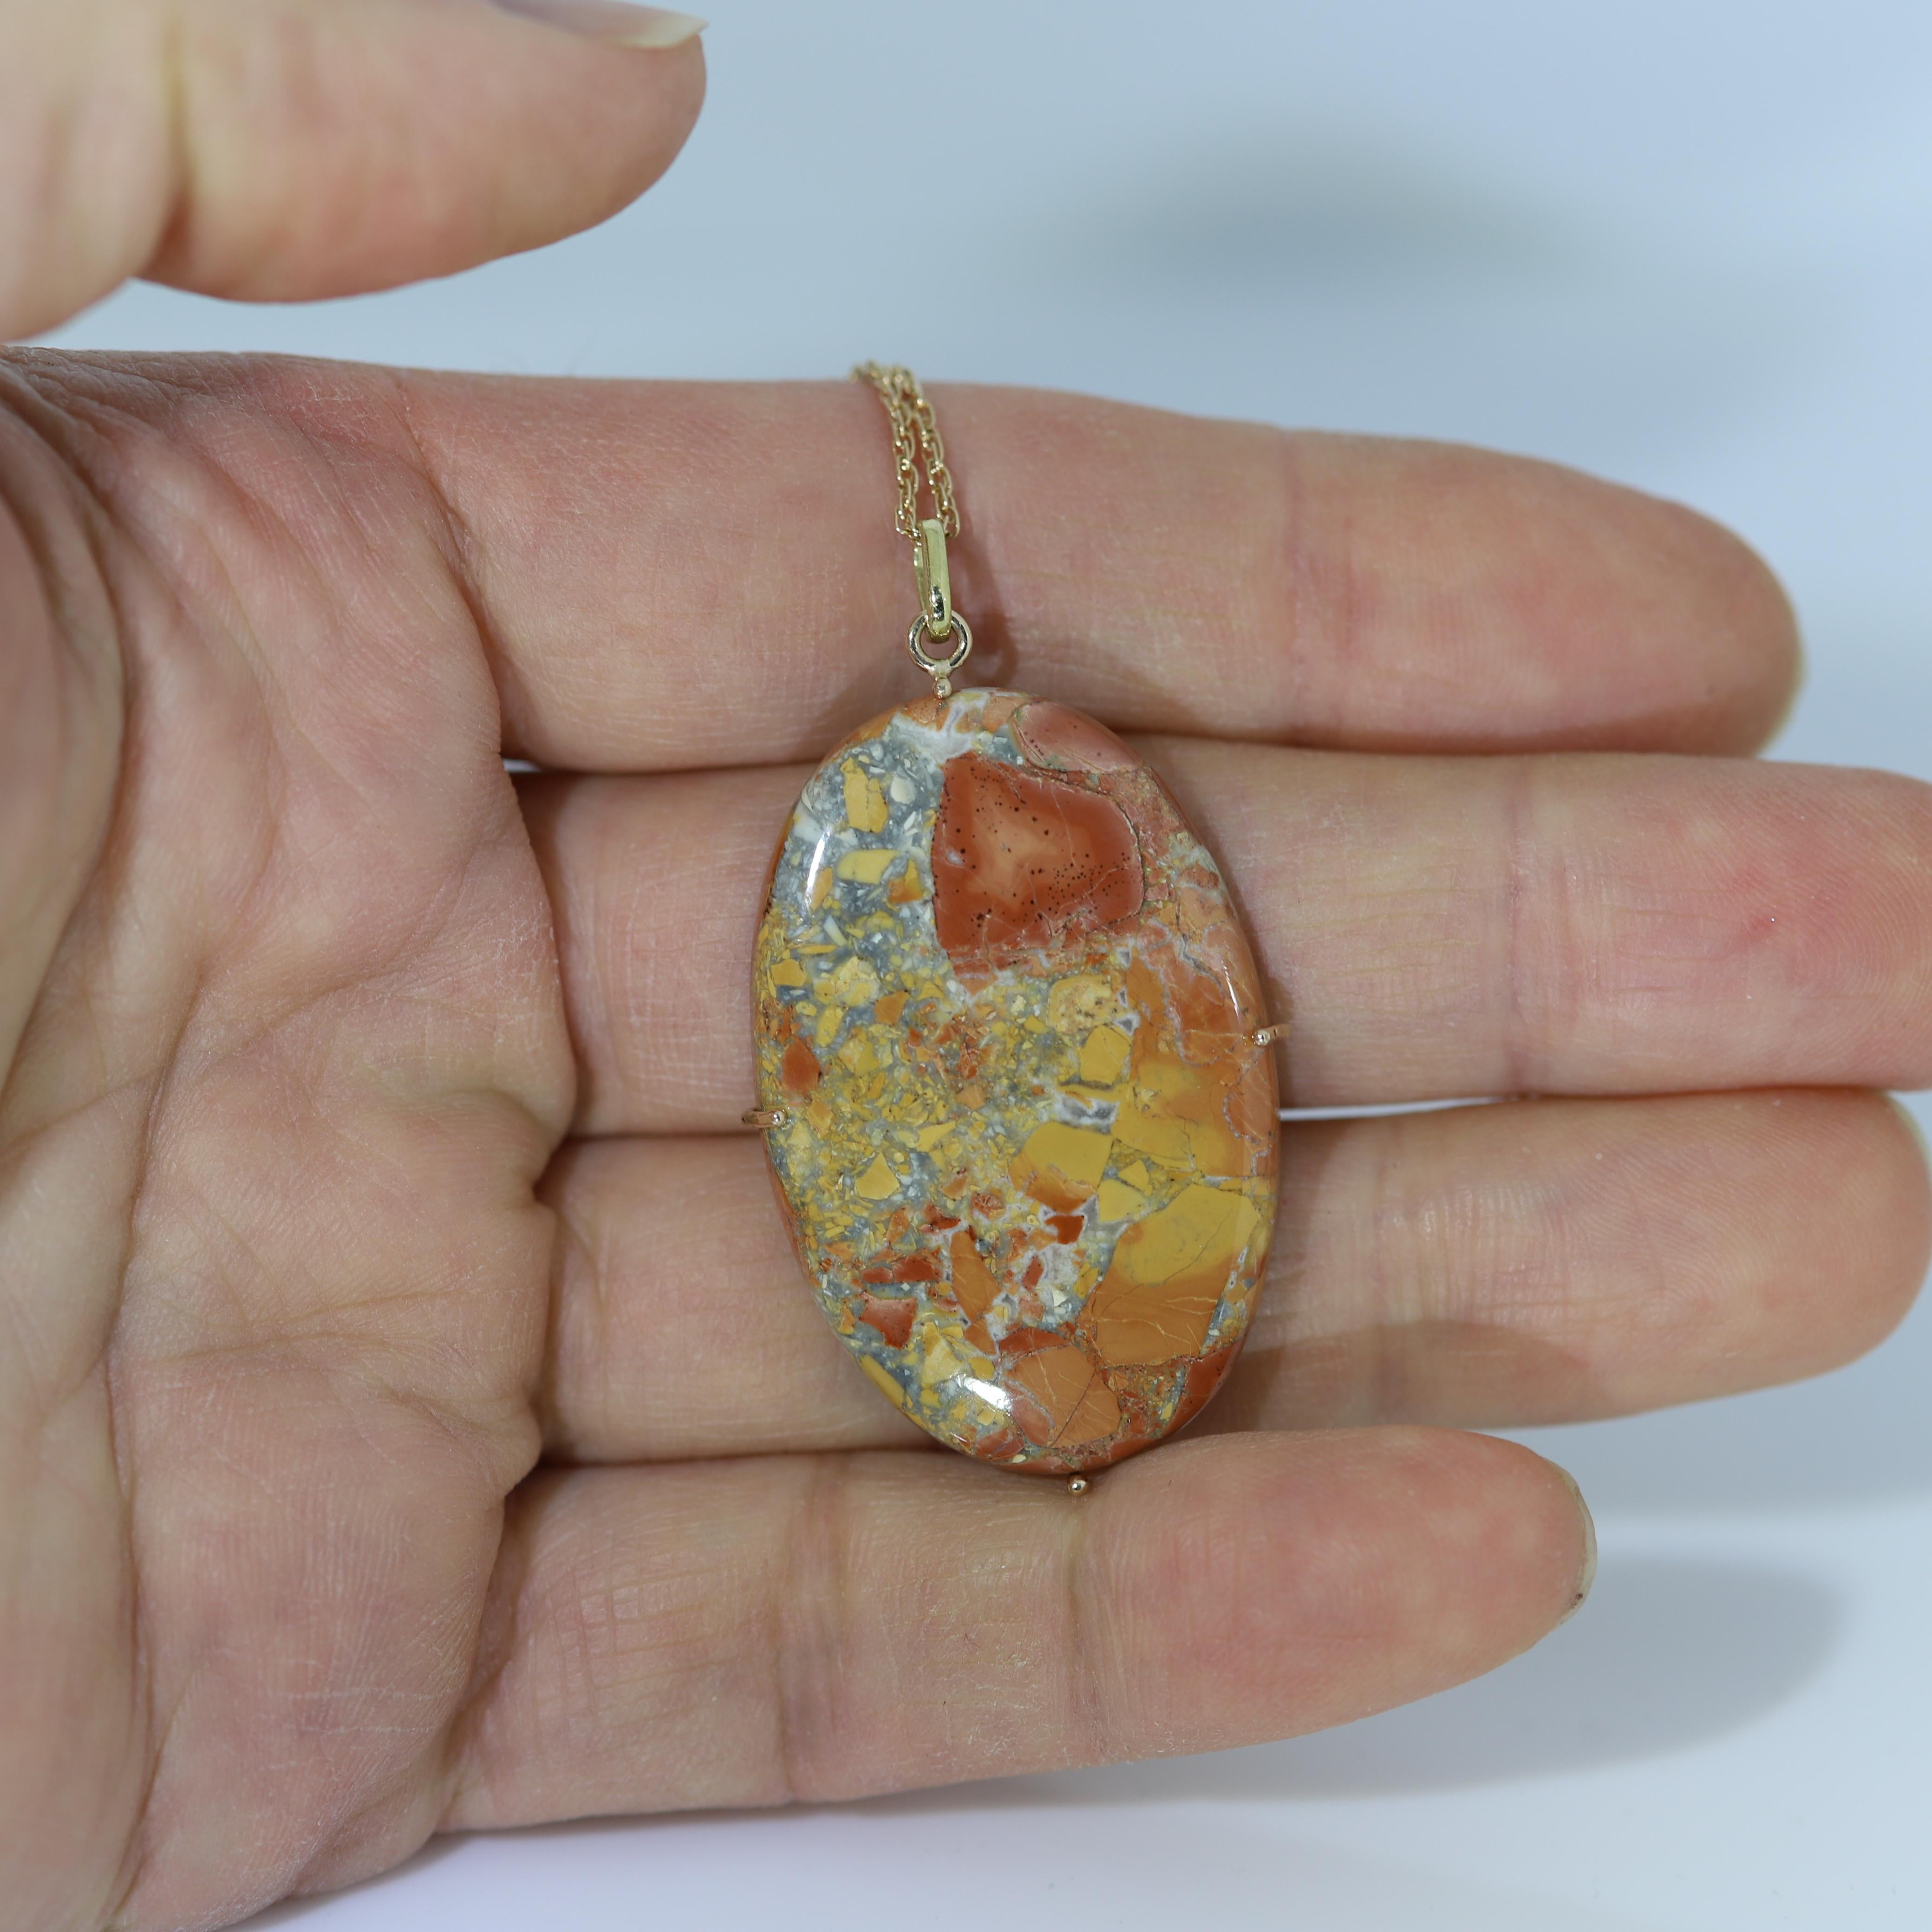 Colorful Maligano Jasper Natural stone Pendant - set in 14k yellow gold wire.
approx size 1.75' inch Tall (45 x 25 mm) 
Chain 18' Inch.
Bright Brown-Yellow tone.
Origin: Indonesia
Made in elegant style that the stone is exposed to the